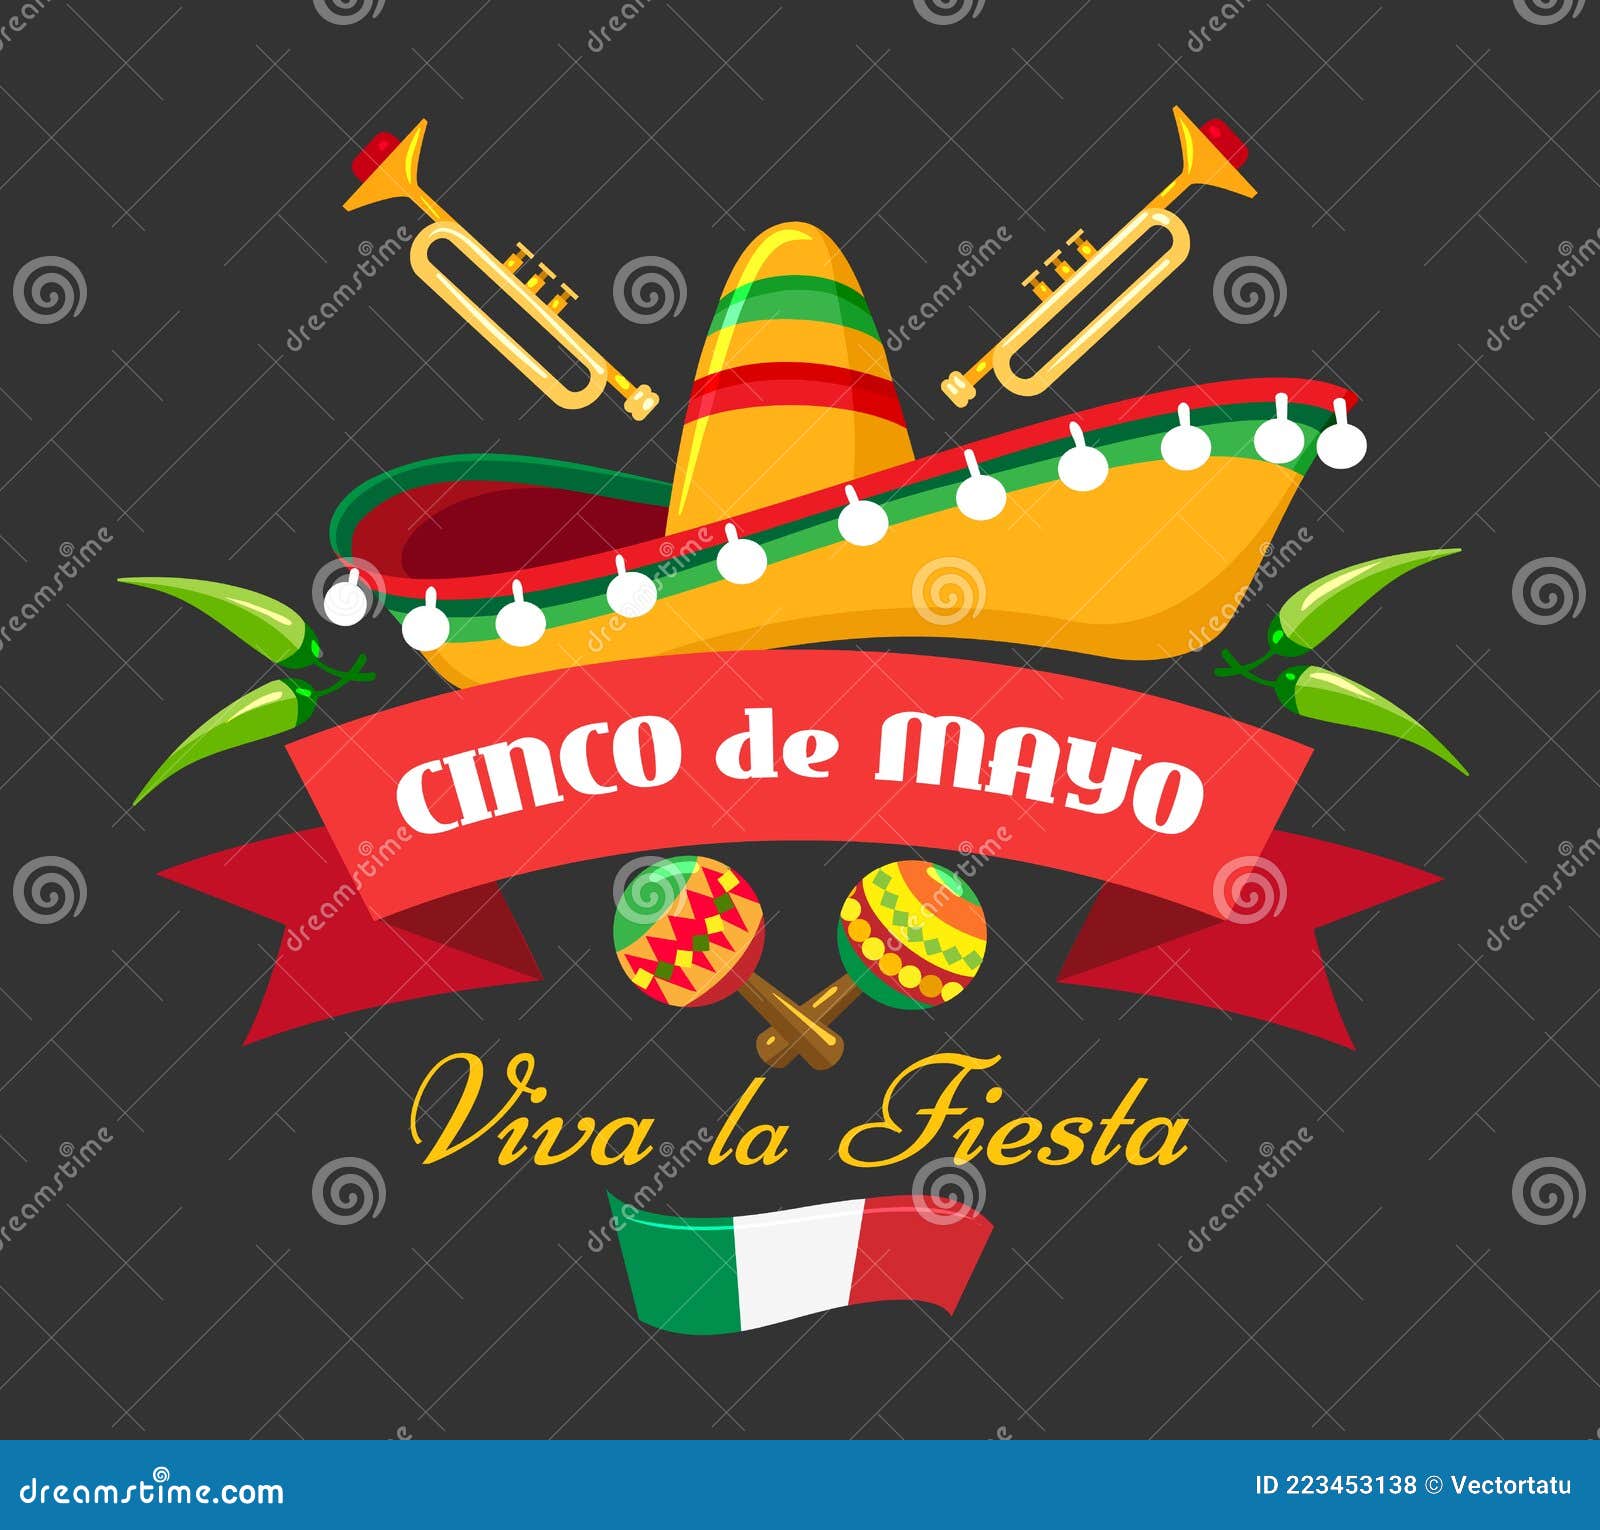 Hispanic Cultural Event Banner Stock Vector - Illustration of mayo, vector:  223453138